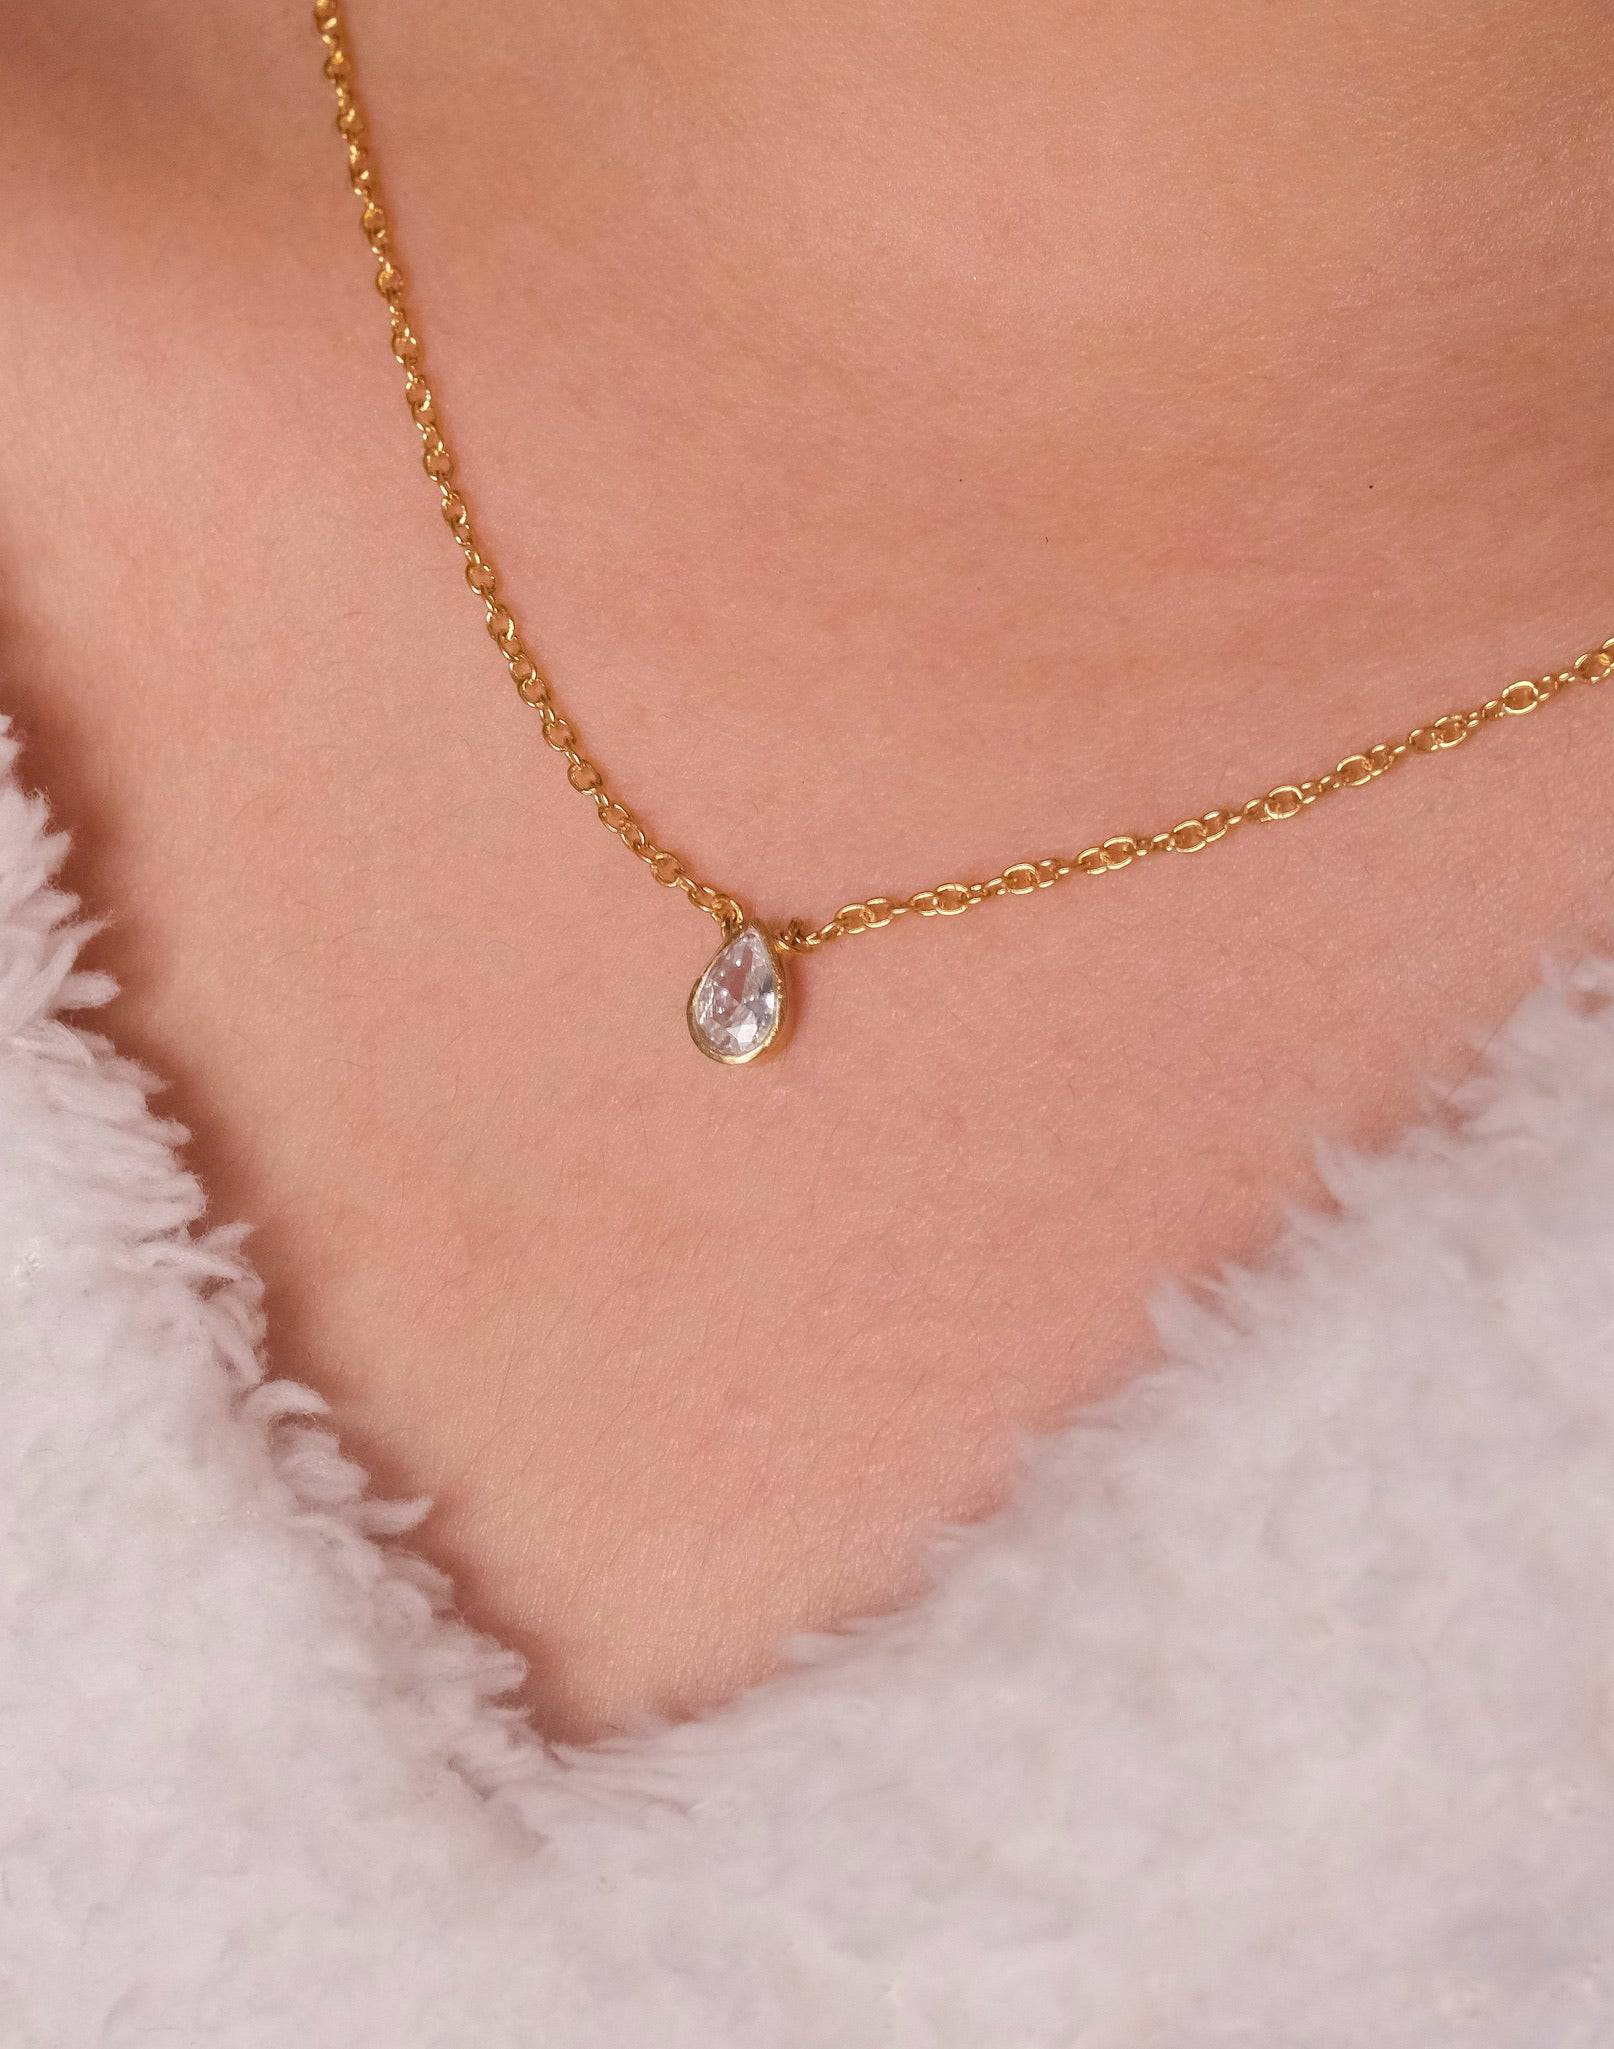 Buy Dainty Diamond Pendant for Women, 0.60 Carat Pear Shape Diamond  Necklace Pendant, Solitaire Diamond Necklace Pear Cut in 14k Yellow Gold  Online in India - Etsy